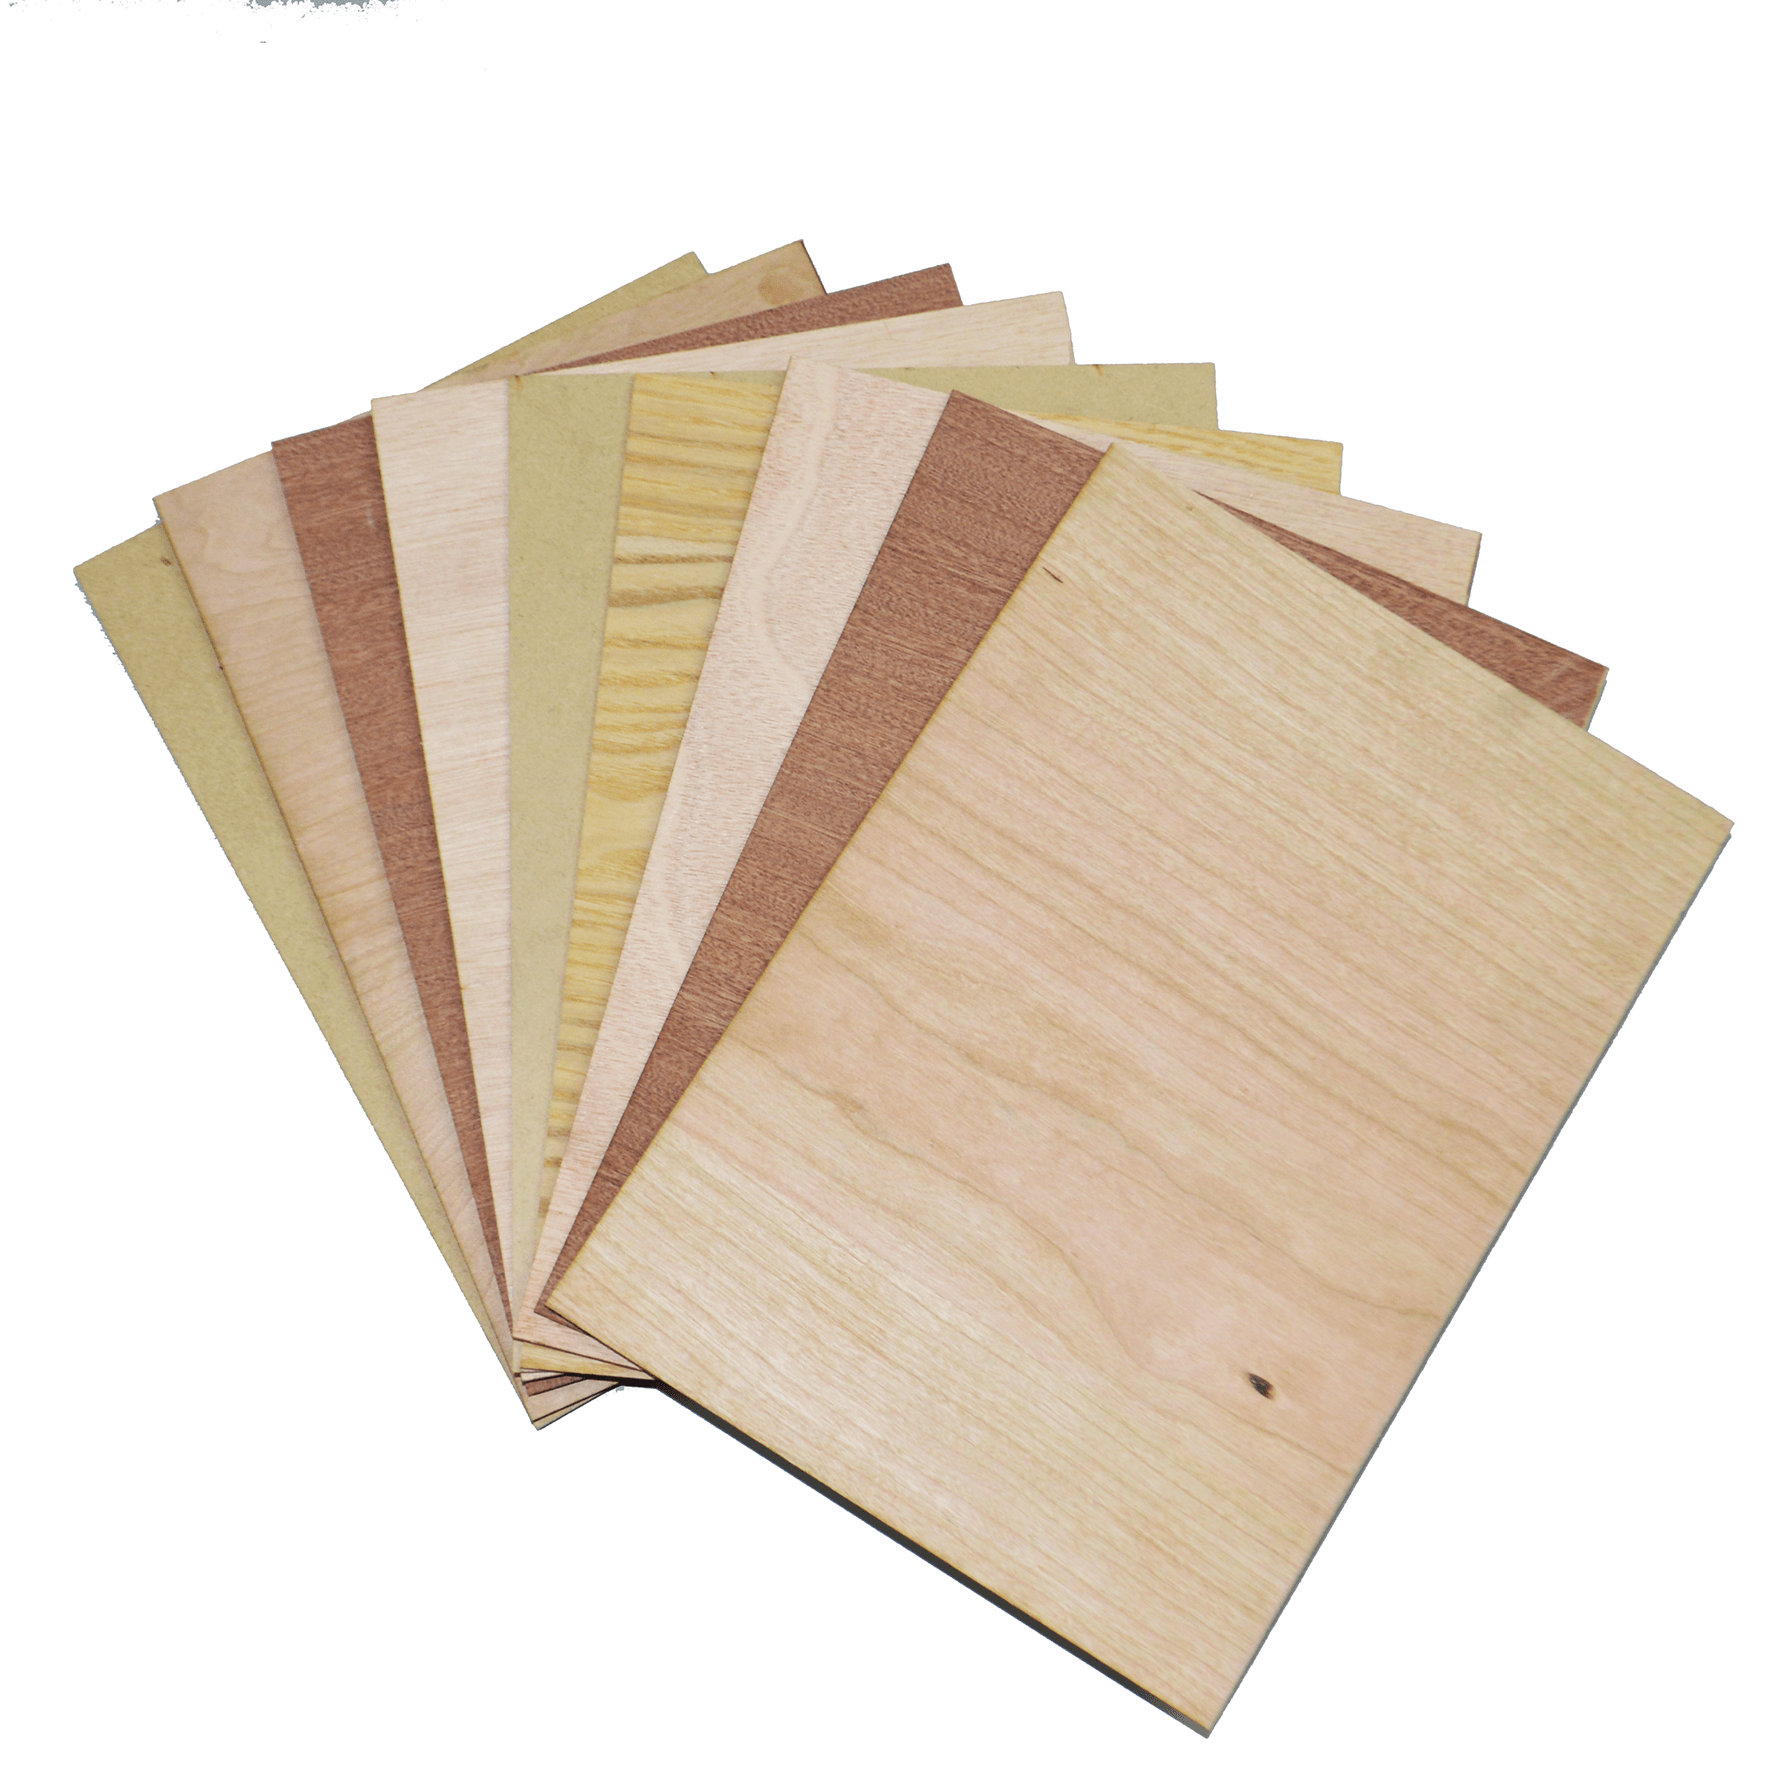 Laser cut wood 9-Piece A4 Sample pack from Laser Supplies in SA